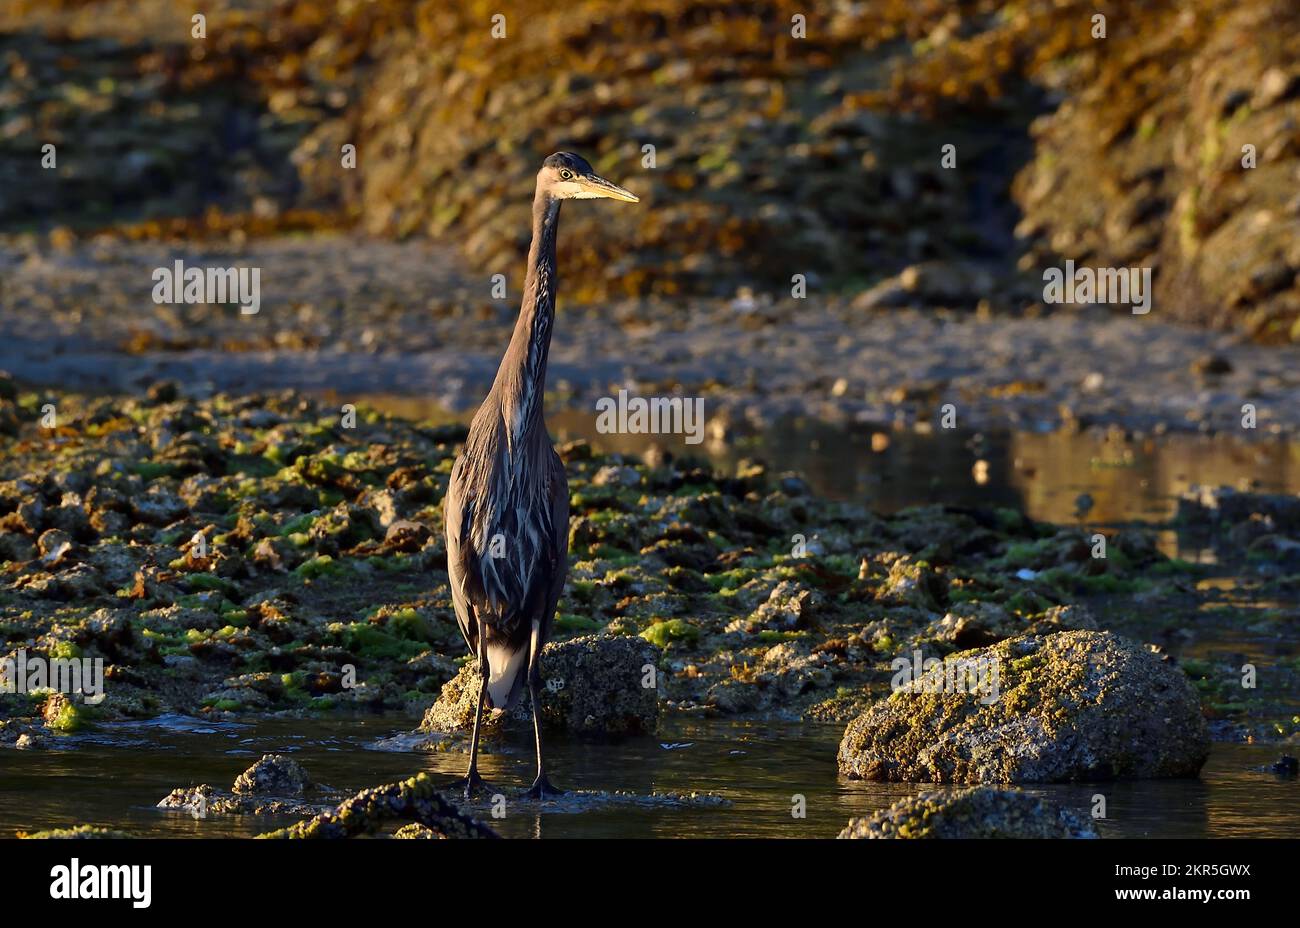 A front view of a Great Blue Heron (Ardea herodias), foraging for fish in shallow water on the shore of Vancouver Island on British Columbia Canada Stock Photo